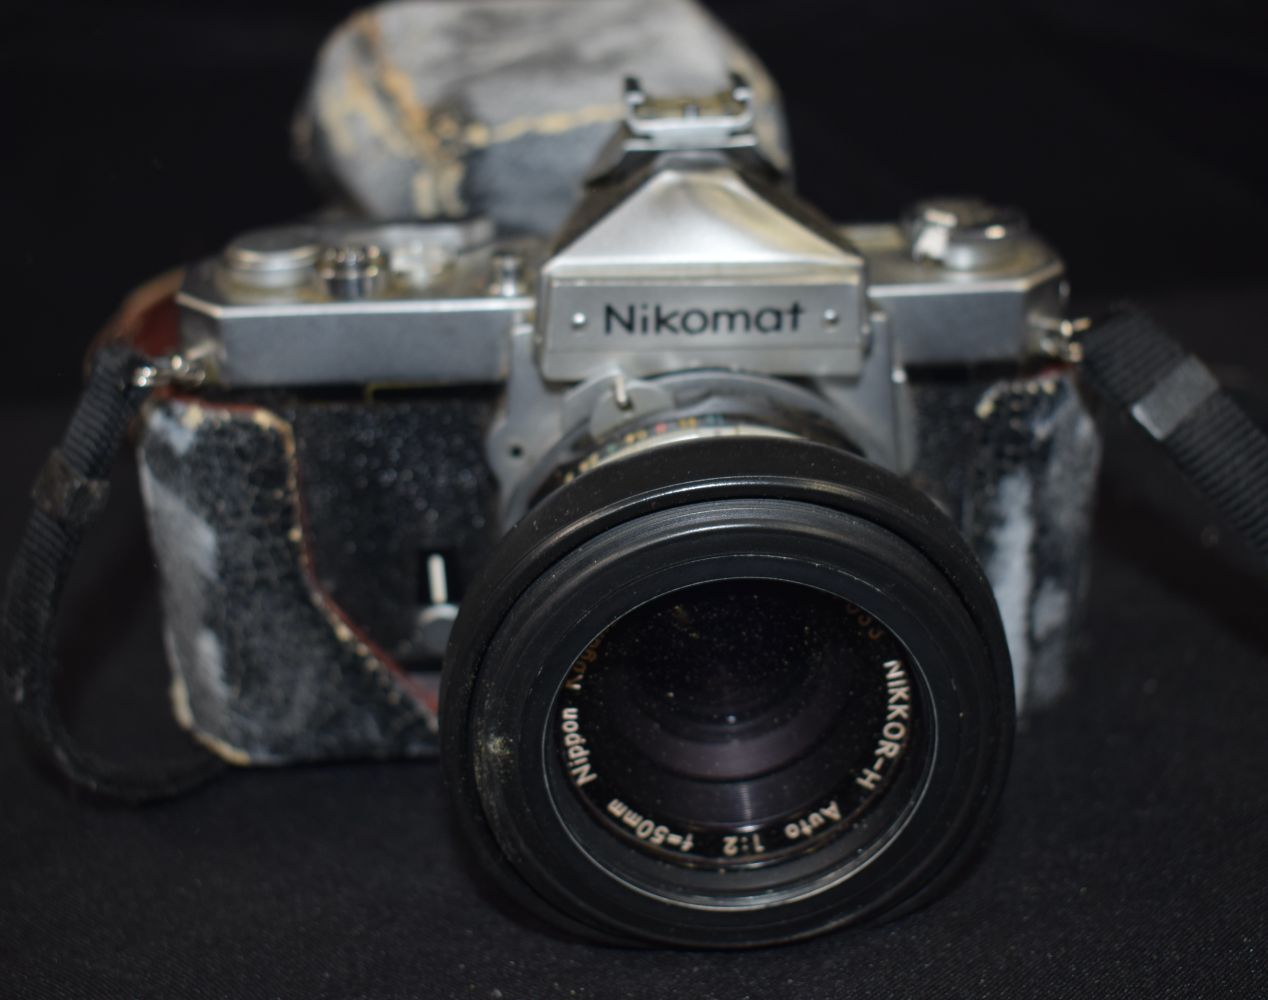 A collection of Cameras, Nikomat FT , Olympus IS 300, Cannon EOS 300 together with Accessories (5). - Image 7 of 8